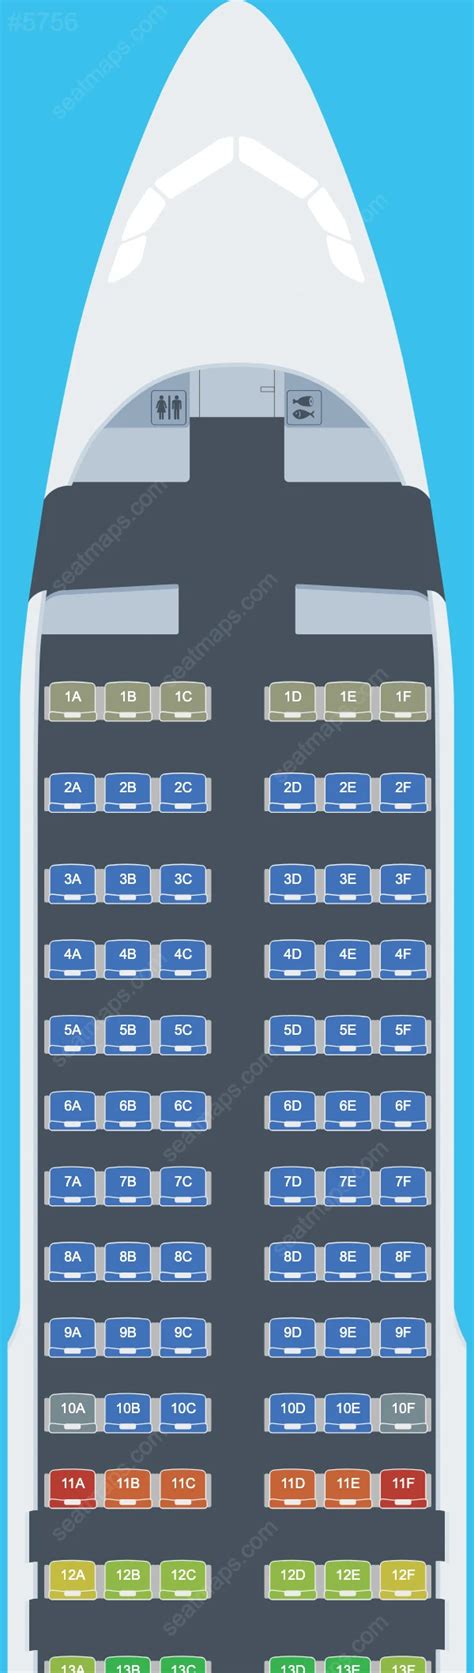 Seat Map Ratings Of Frontier Airlines Airbus A320